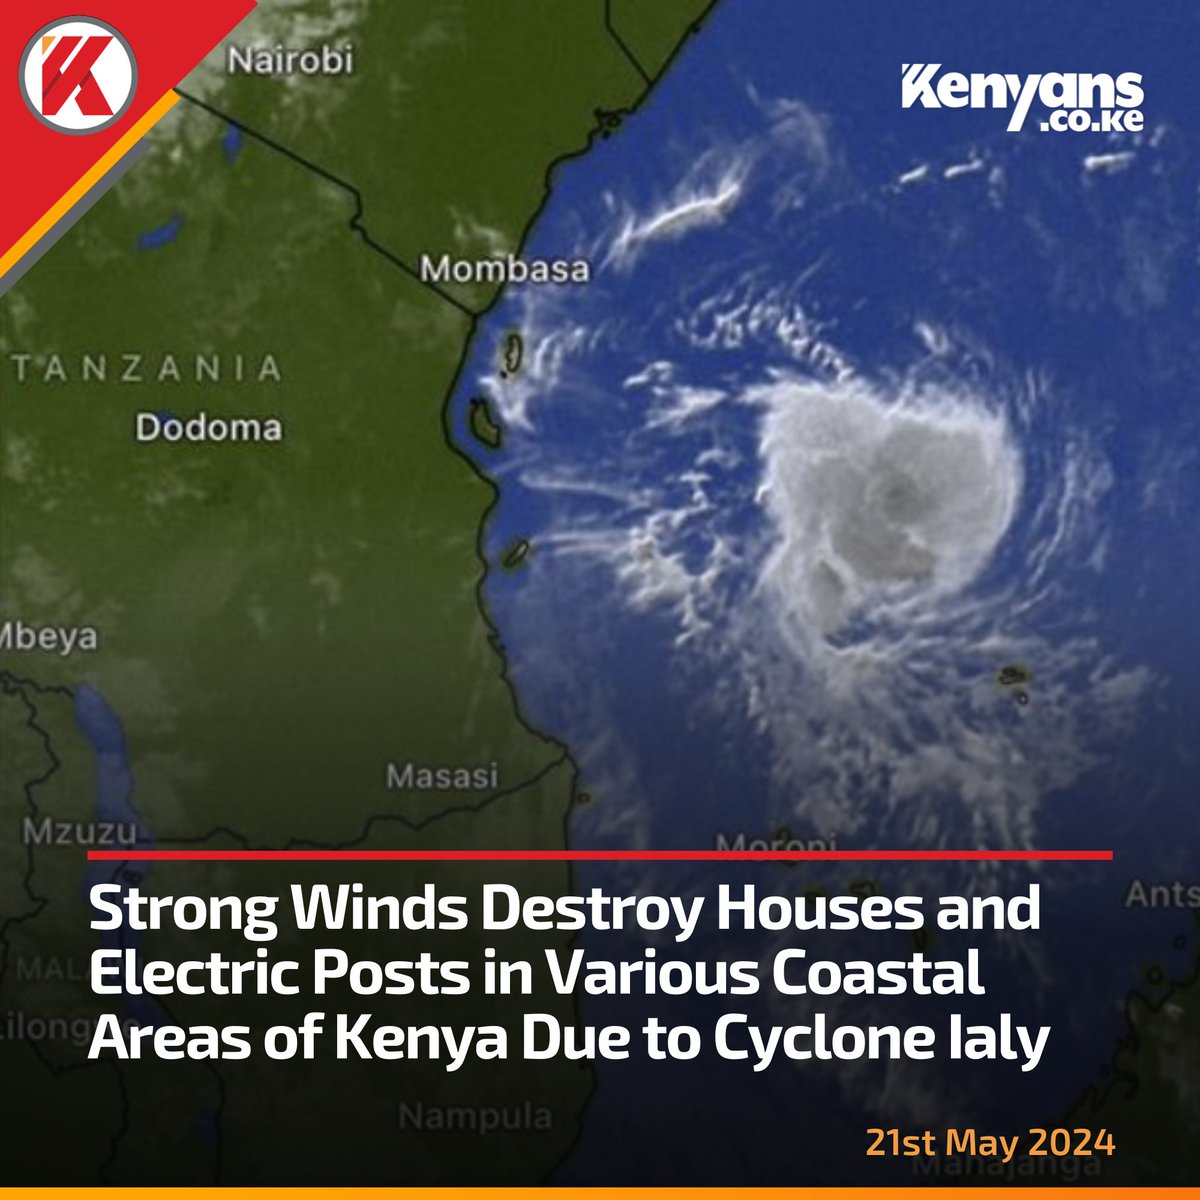 Strong winds destroy houses and electric posts in various coastal areas of Kenya due to Cyclone Ialy